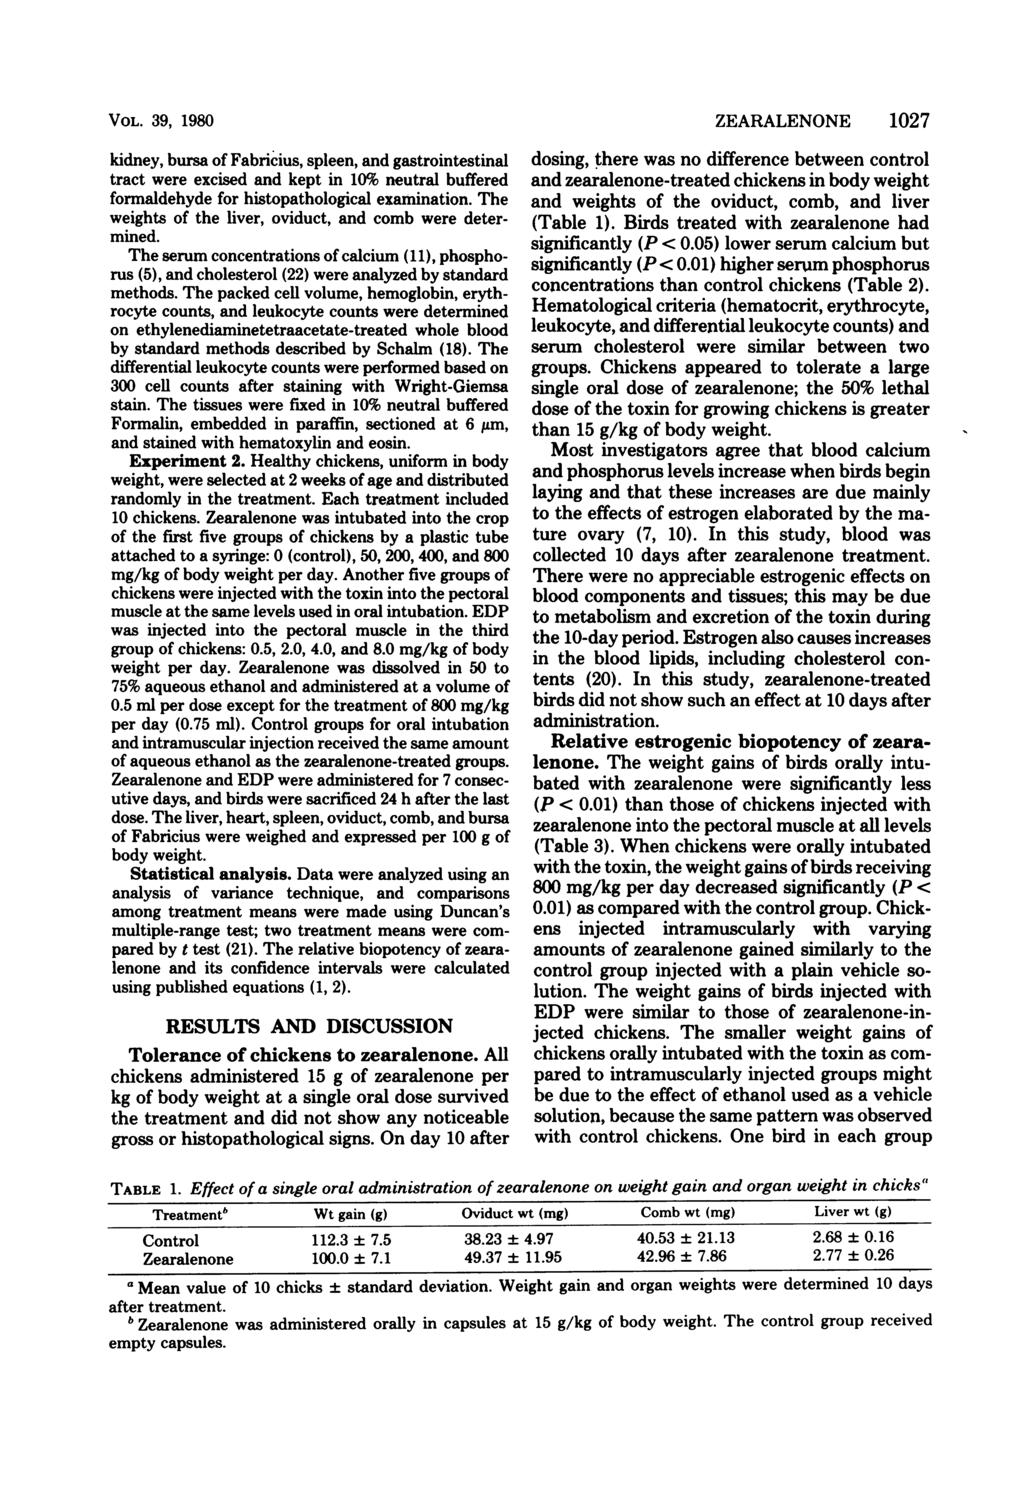 VOL. 39, 1980 kidney, bursa of Fabricius, spleen, and gastrointestinal tract were excised and kept in 10% neutral buffered formaldehyde for histopathological examination.